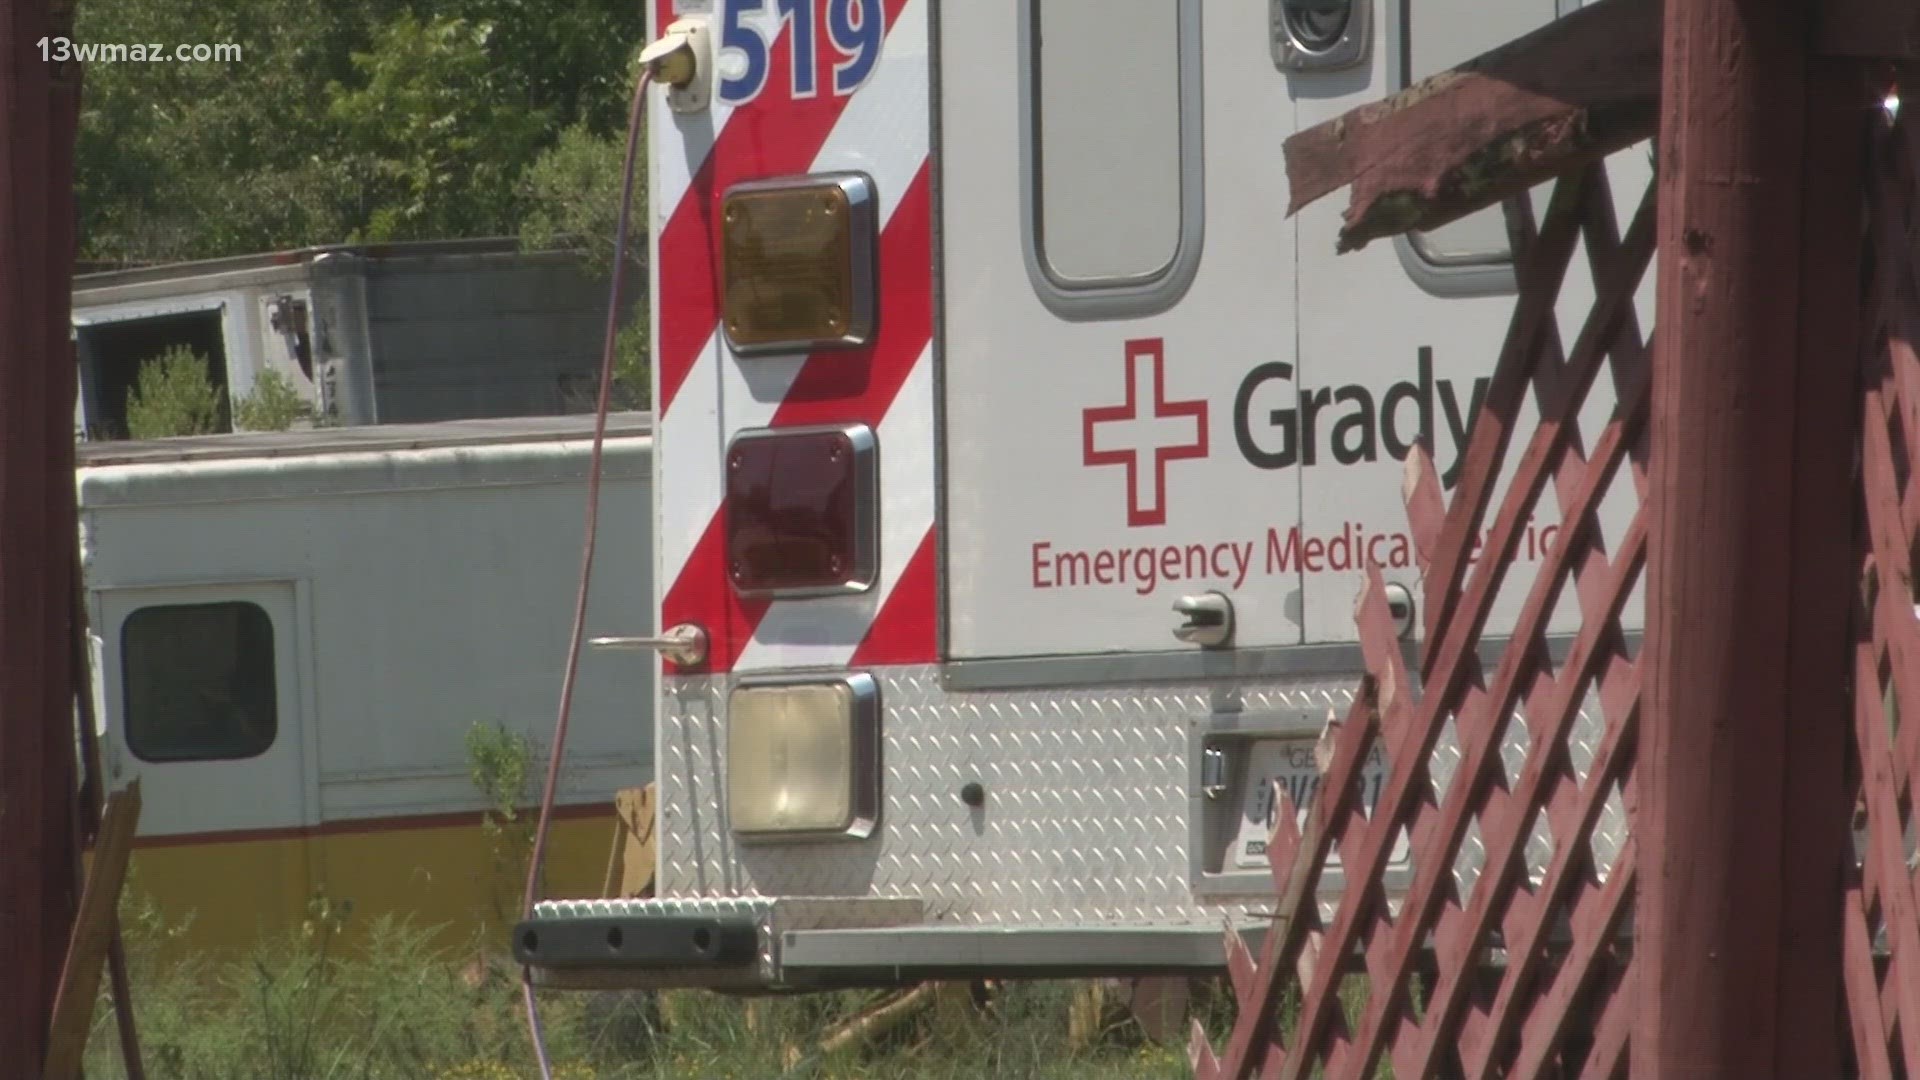 Last week, Grady EMS in Atlanta told Baldwin Commissioners in a letter saying they would not renew their contract once it expires in November